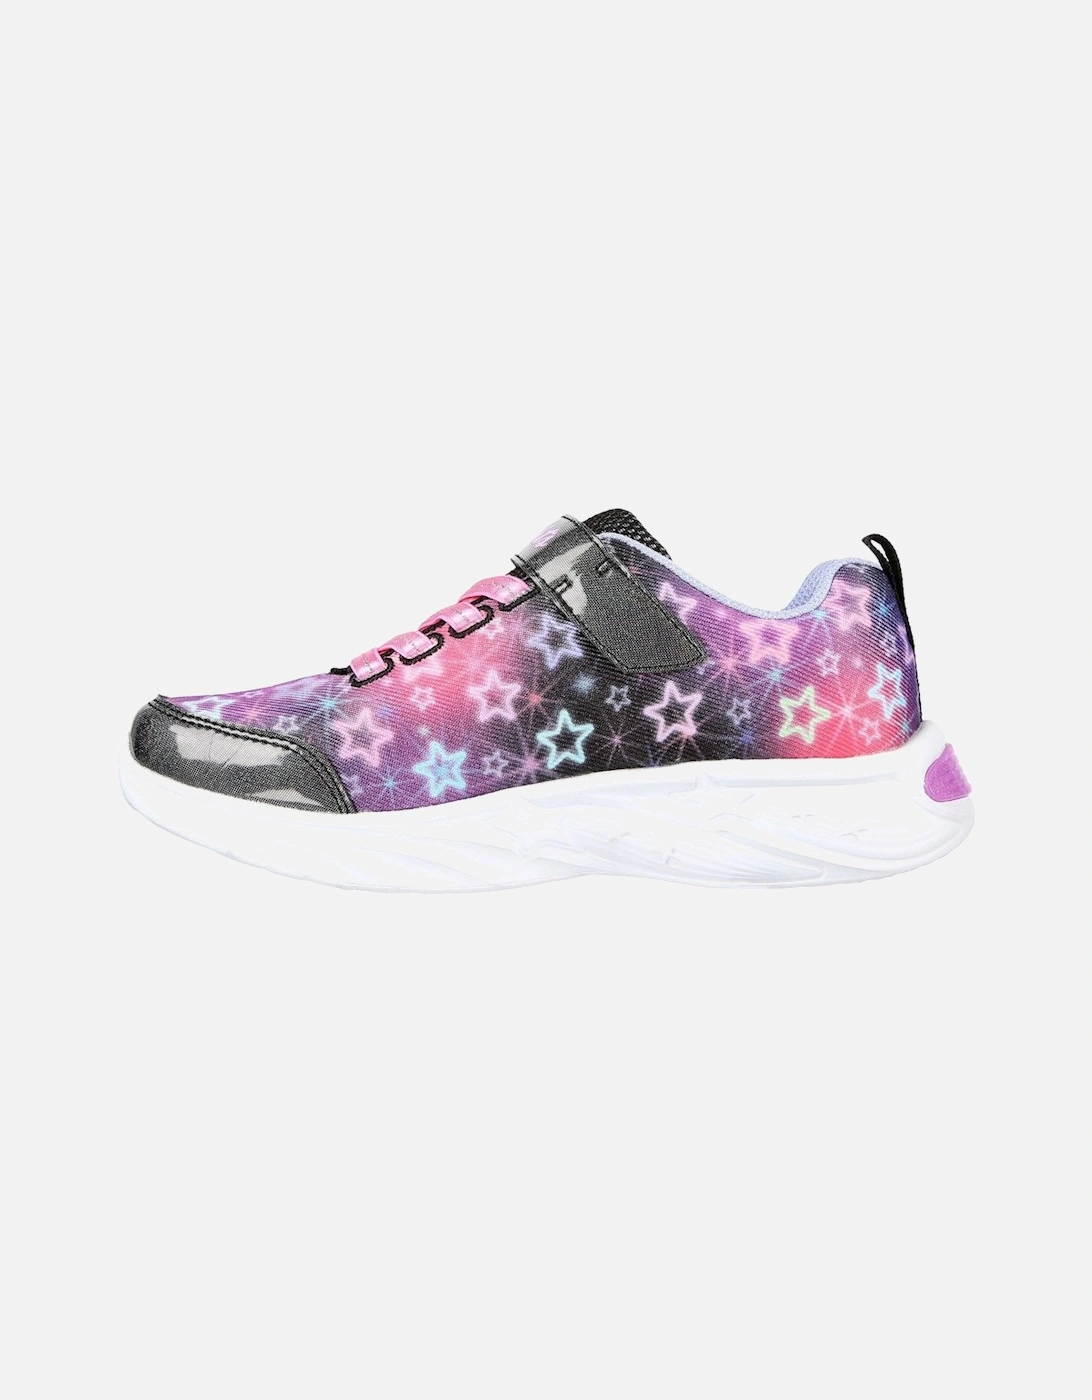 Star Sparks Kids Trainers